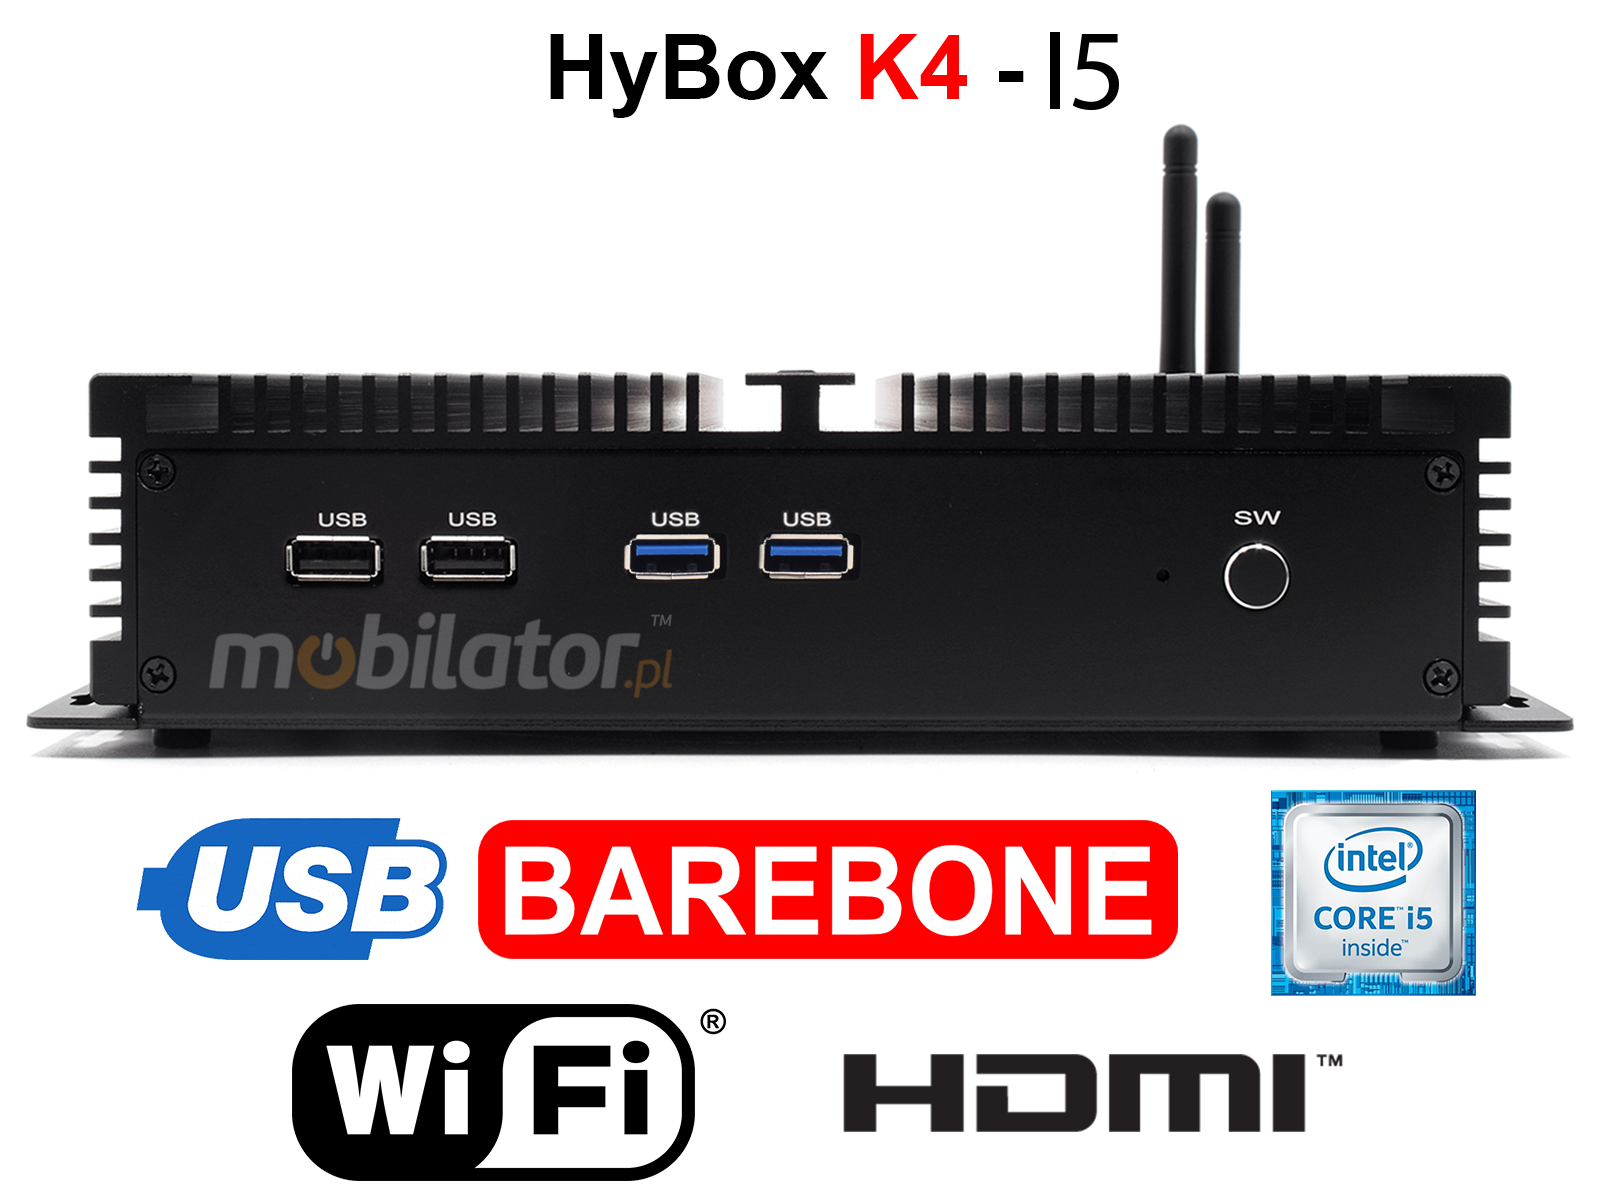 HyBOX K4 small reliable fast and efficient mini pc 